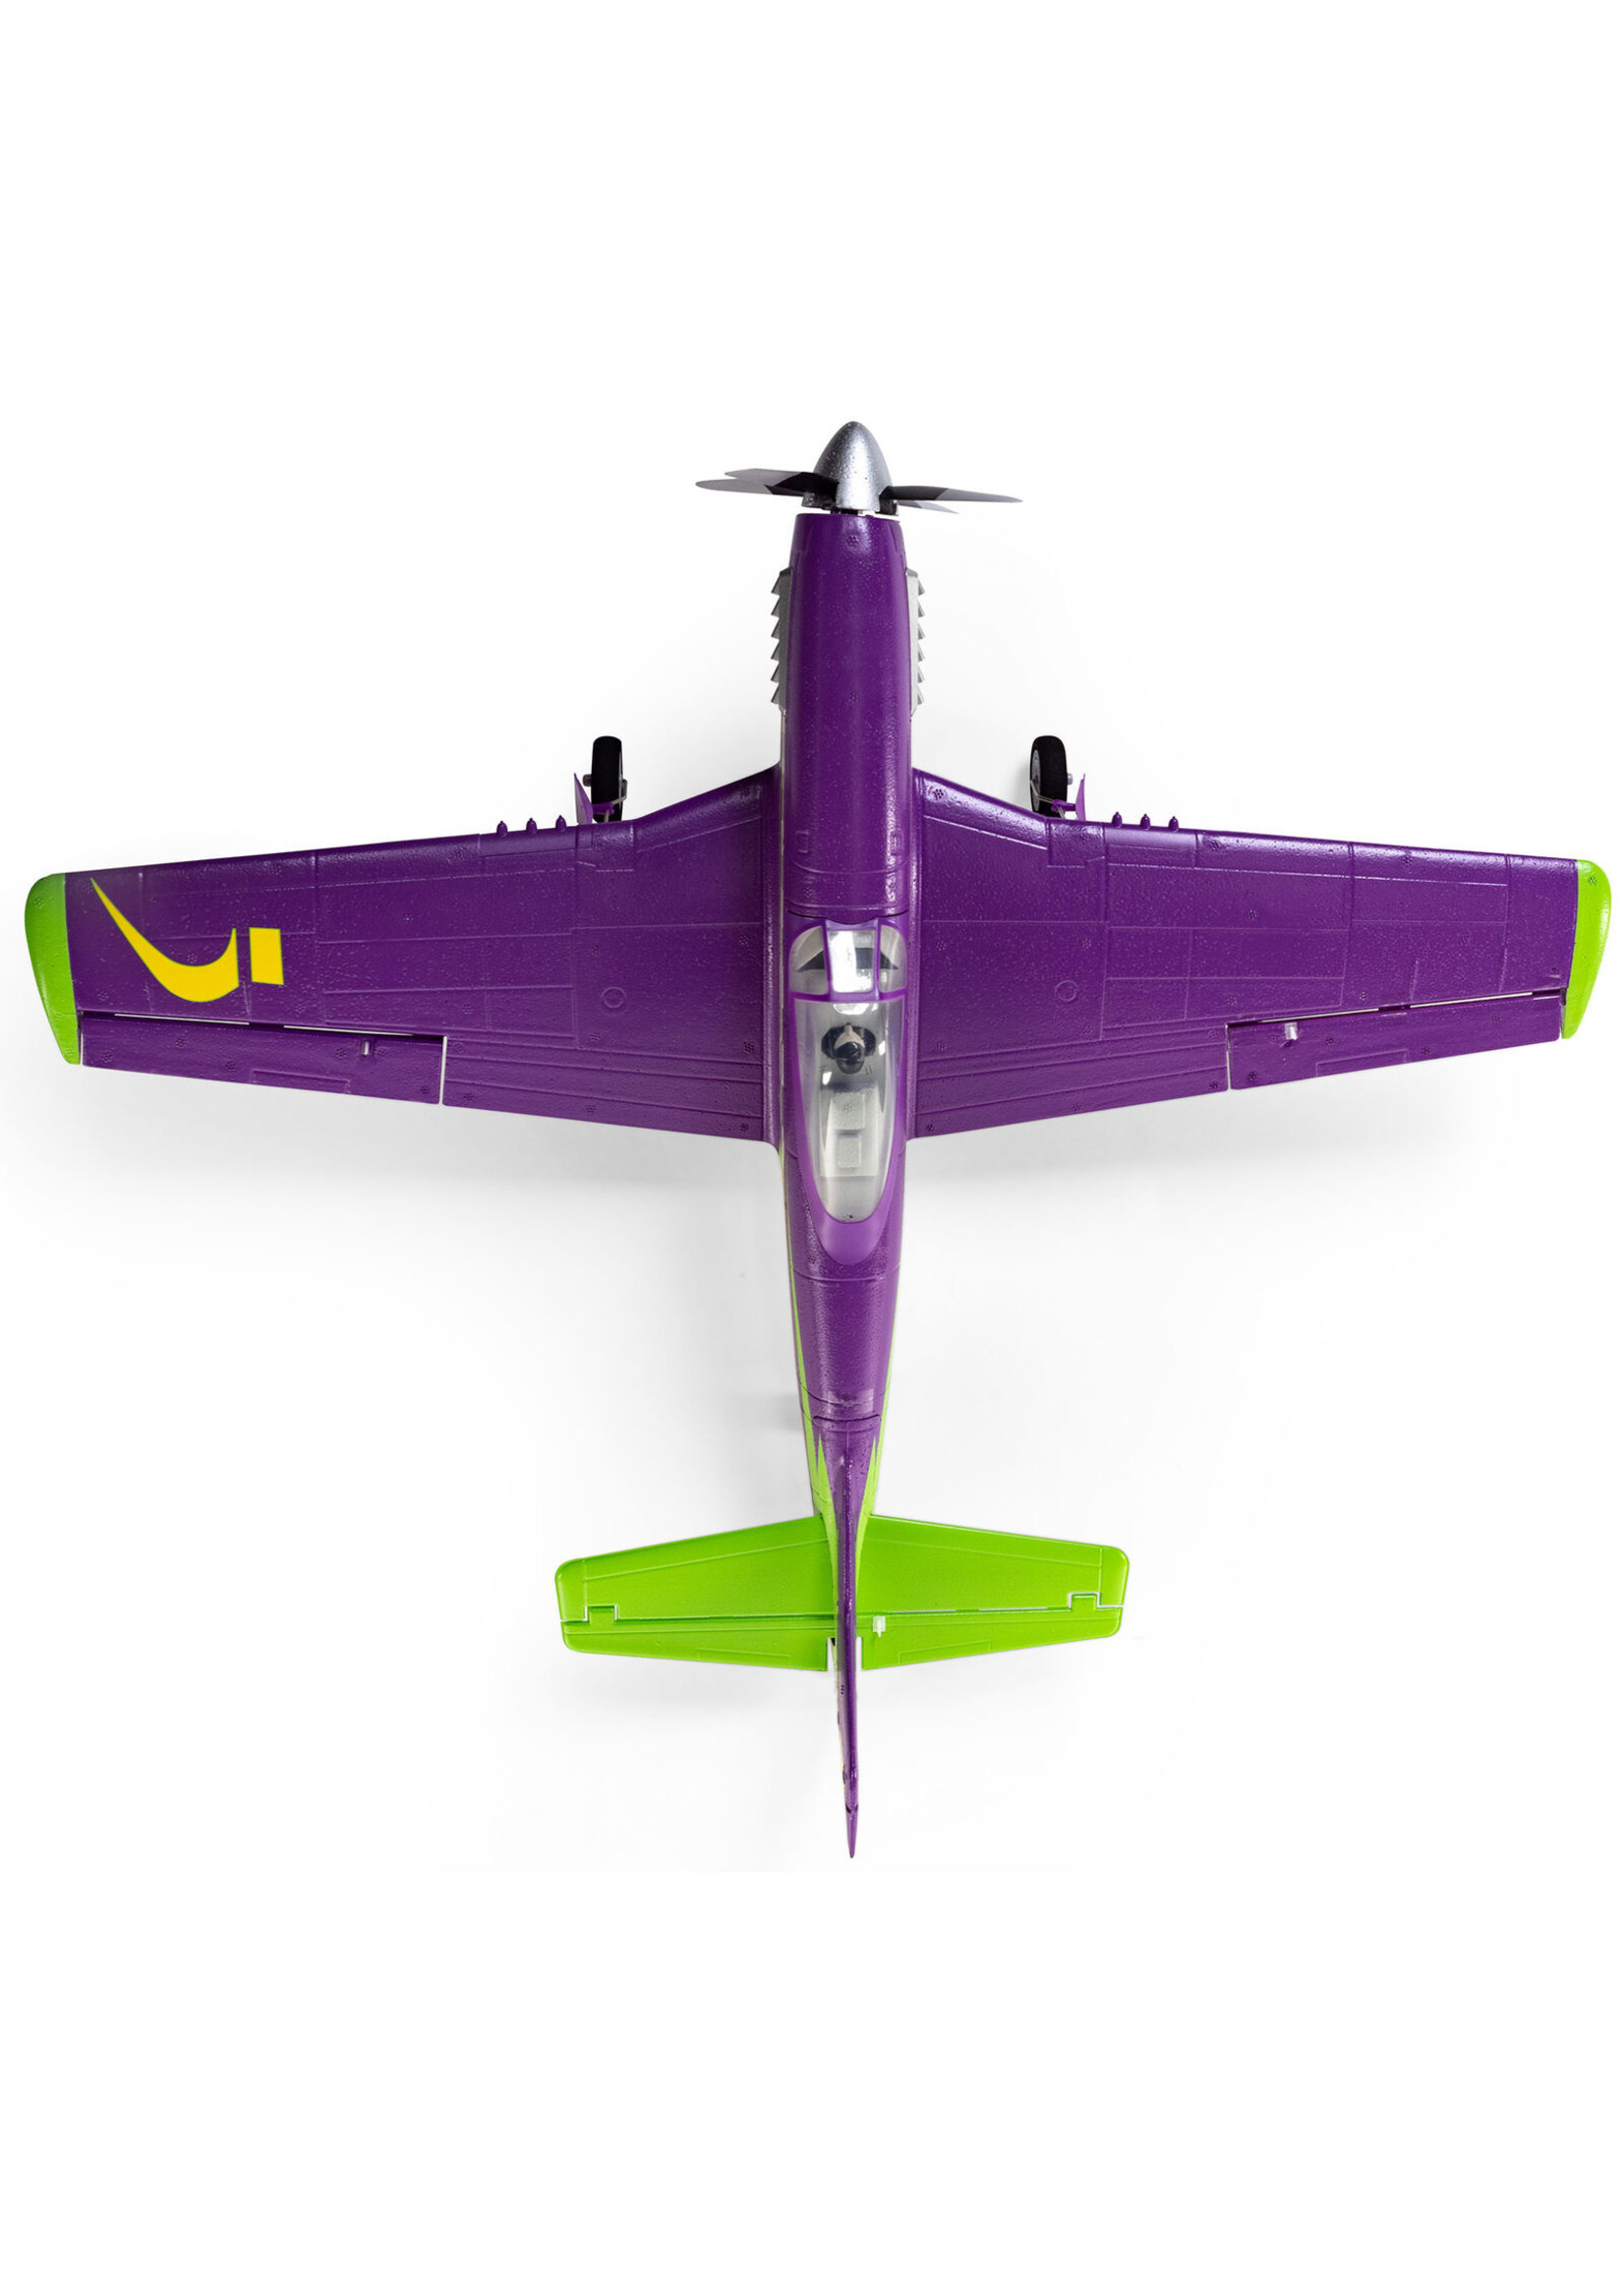 E-flite UMX P-51D Voodoo BNF Basic with AS3X and SAFE Select